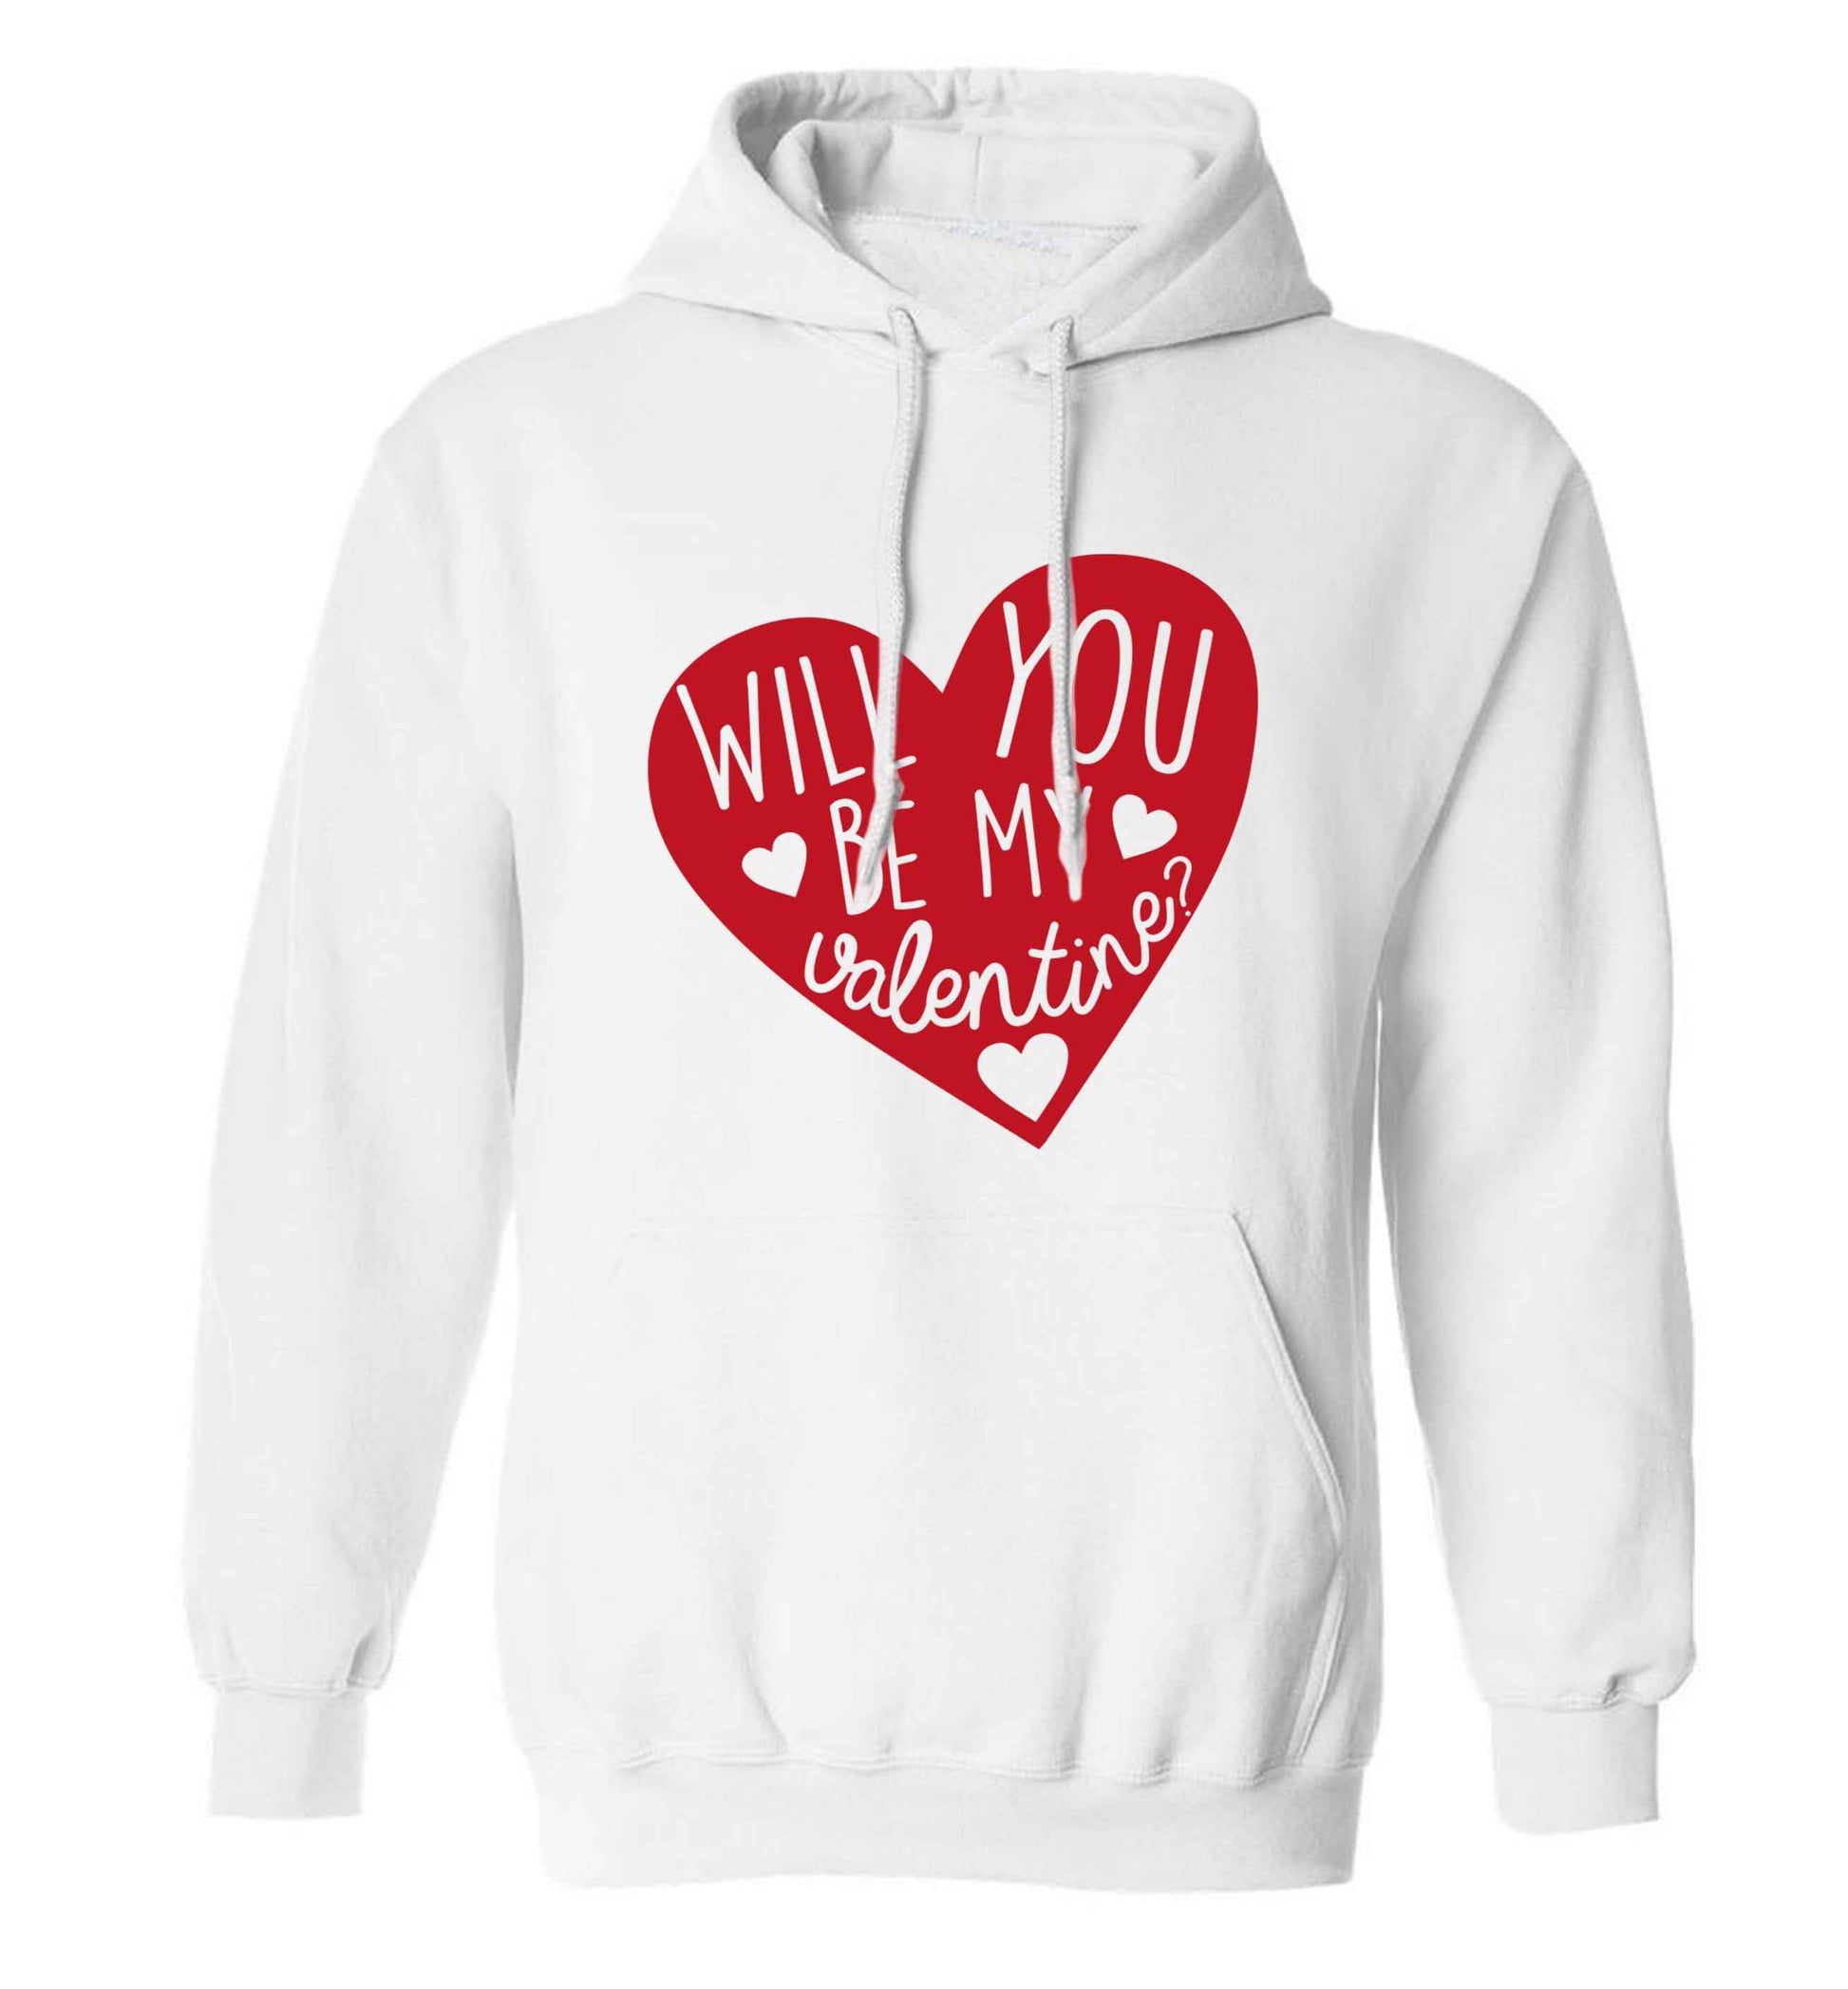 Will you be my valentine? adults unisex white hoodie 2XL